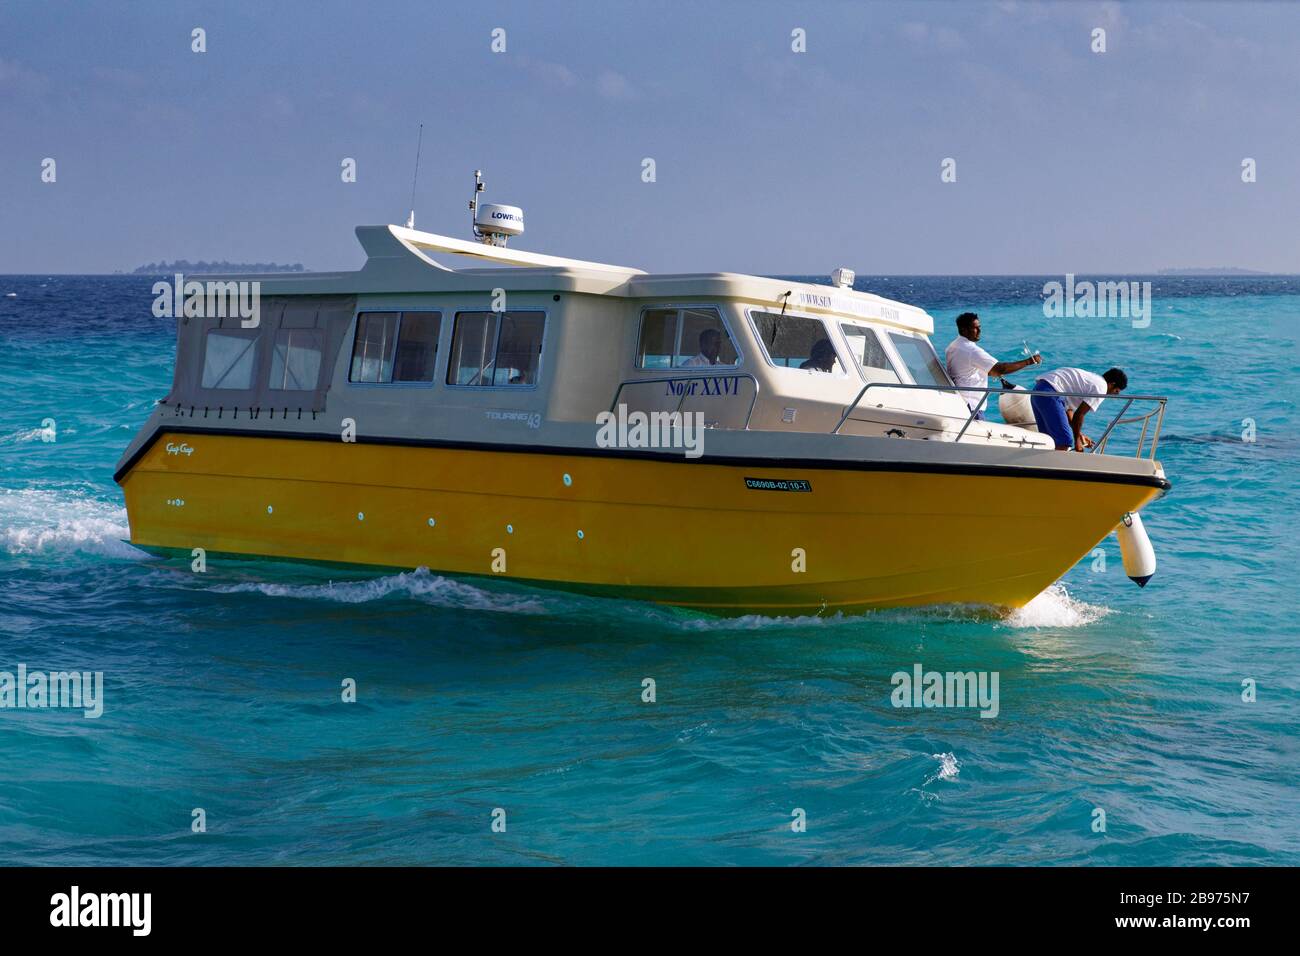 Typical speedboat for transfer of guests between islands and airport, Indian Ocean, Summer Island, North Male Atoll, Maldives Stock Photo